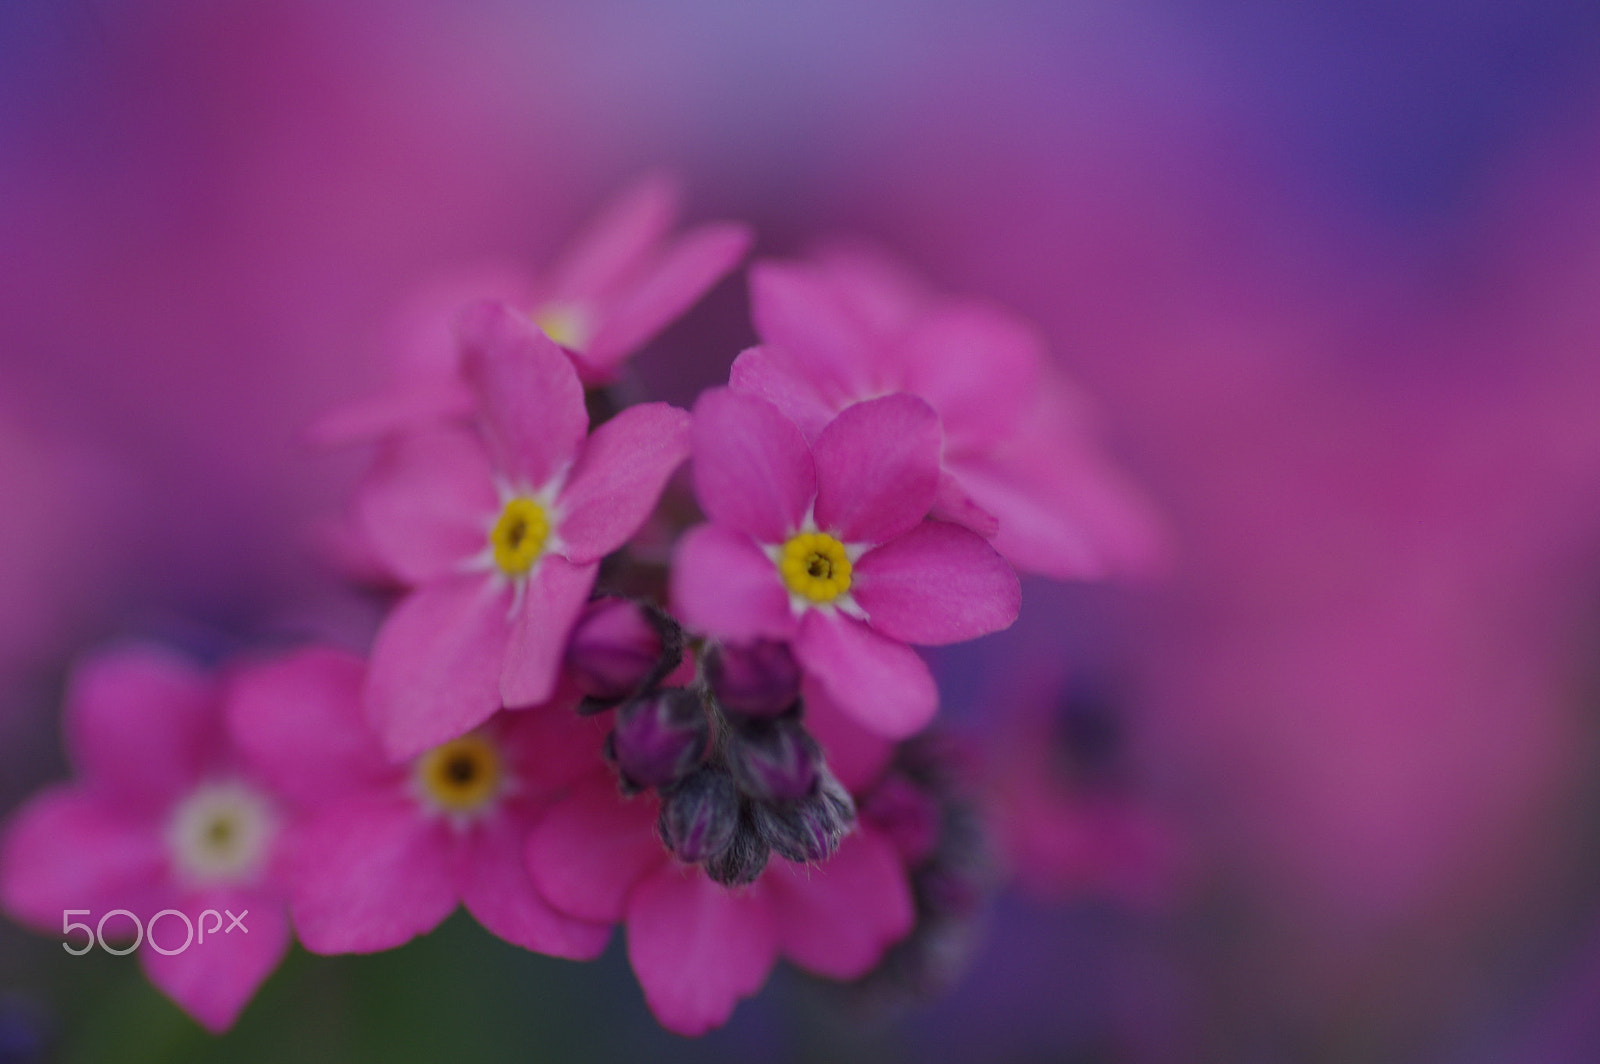 Pentax K-3 II sample photo. Forget me not photography